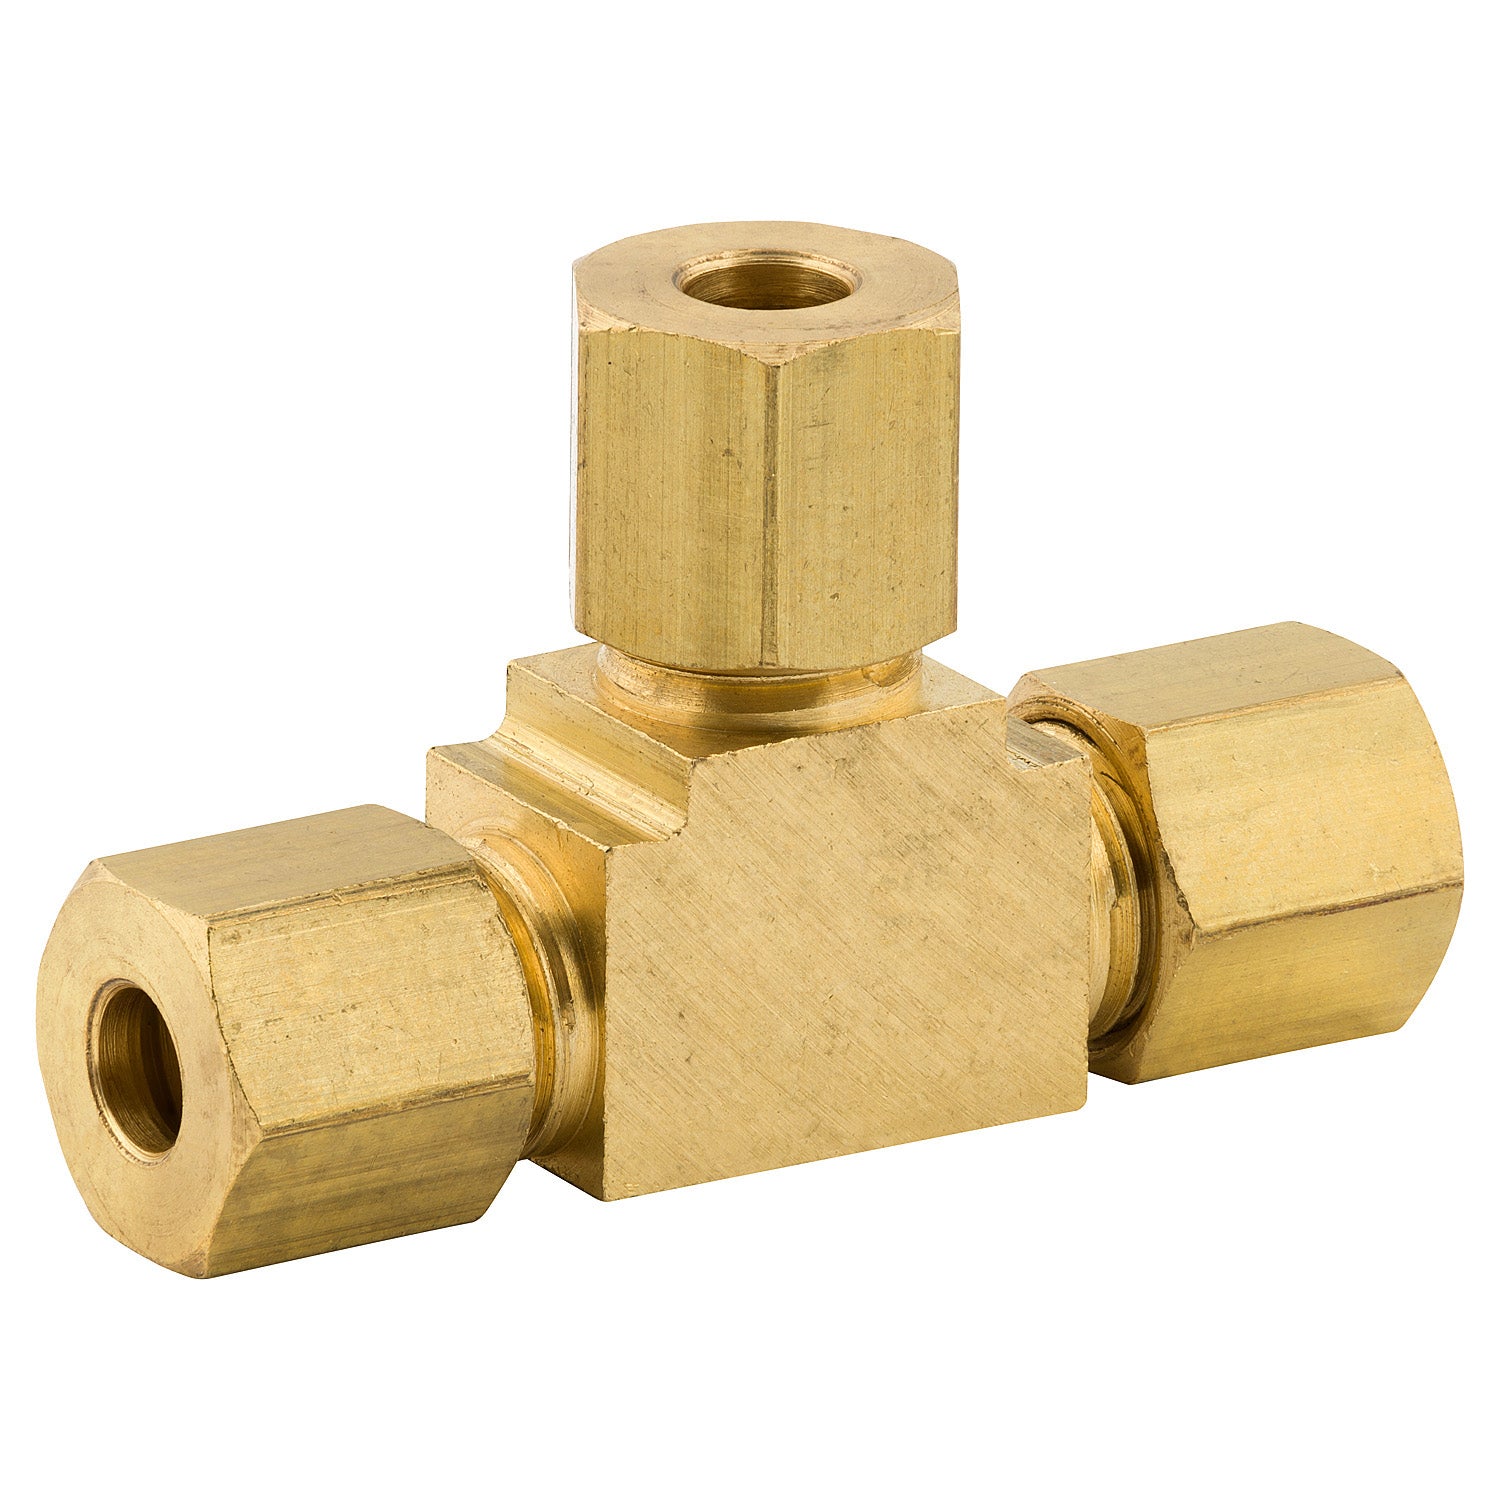 3/16x3/16x3/16 Compression Tee Brass Forged